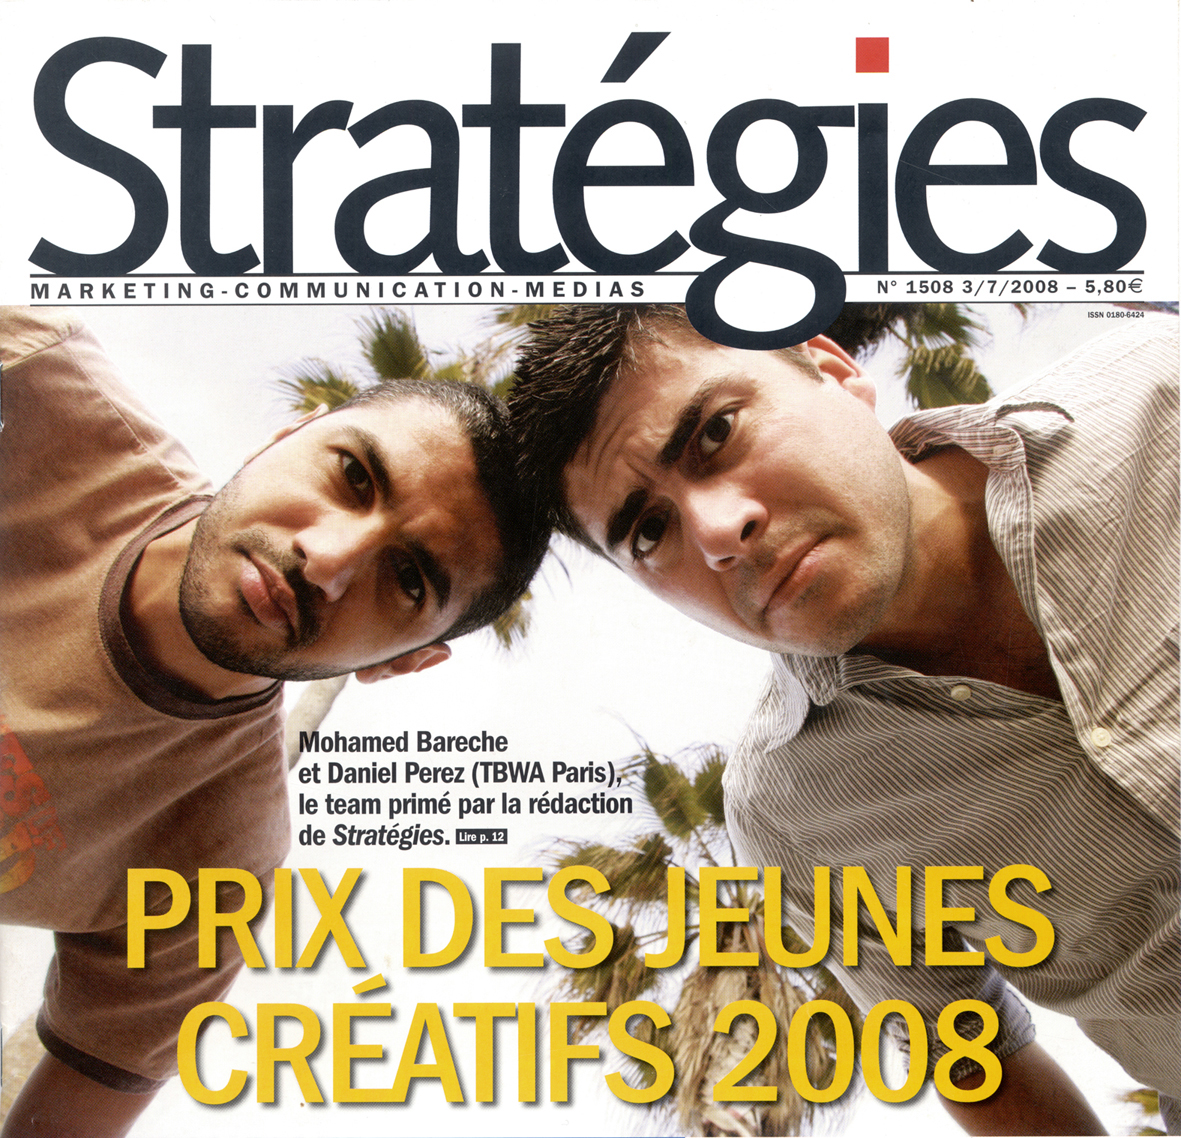 mohamed bareche daniel perez strategies creatives of the year tbwa/paris Young Creatives grand prix strategies 2008 mcdonald's harrys Cannes lions Awards amnesty international adidas playstation absolut